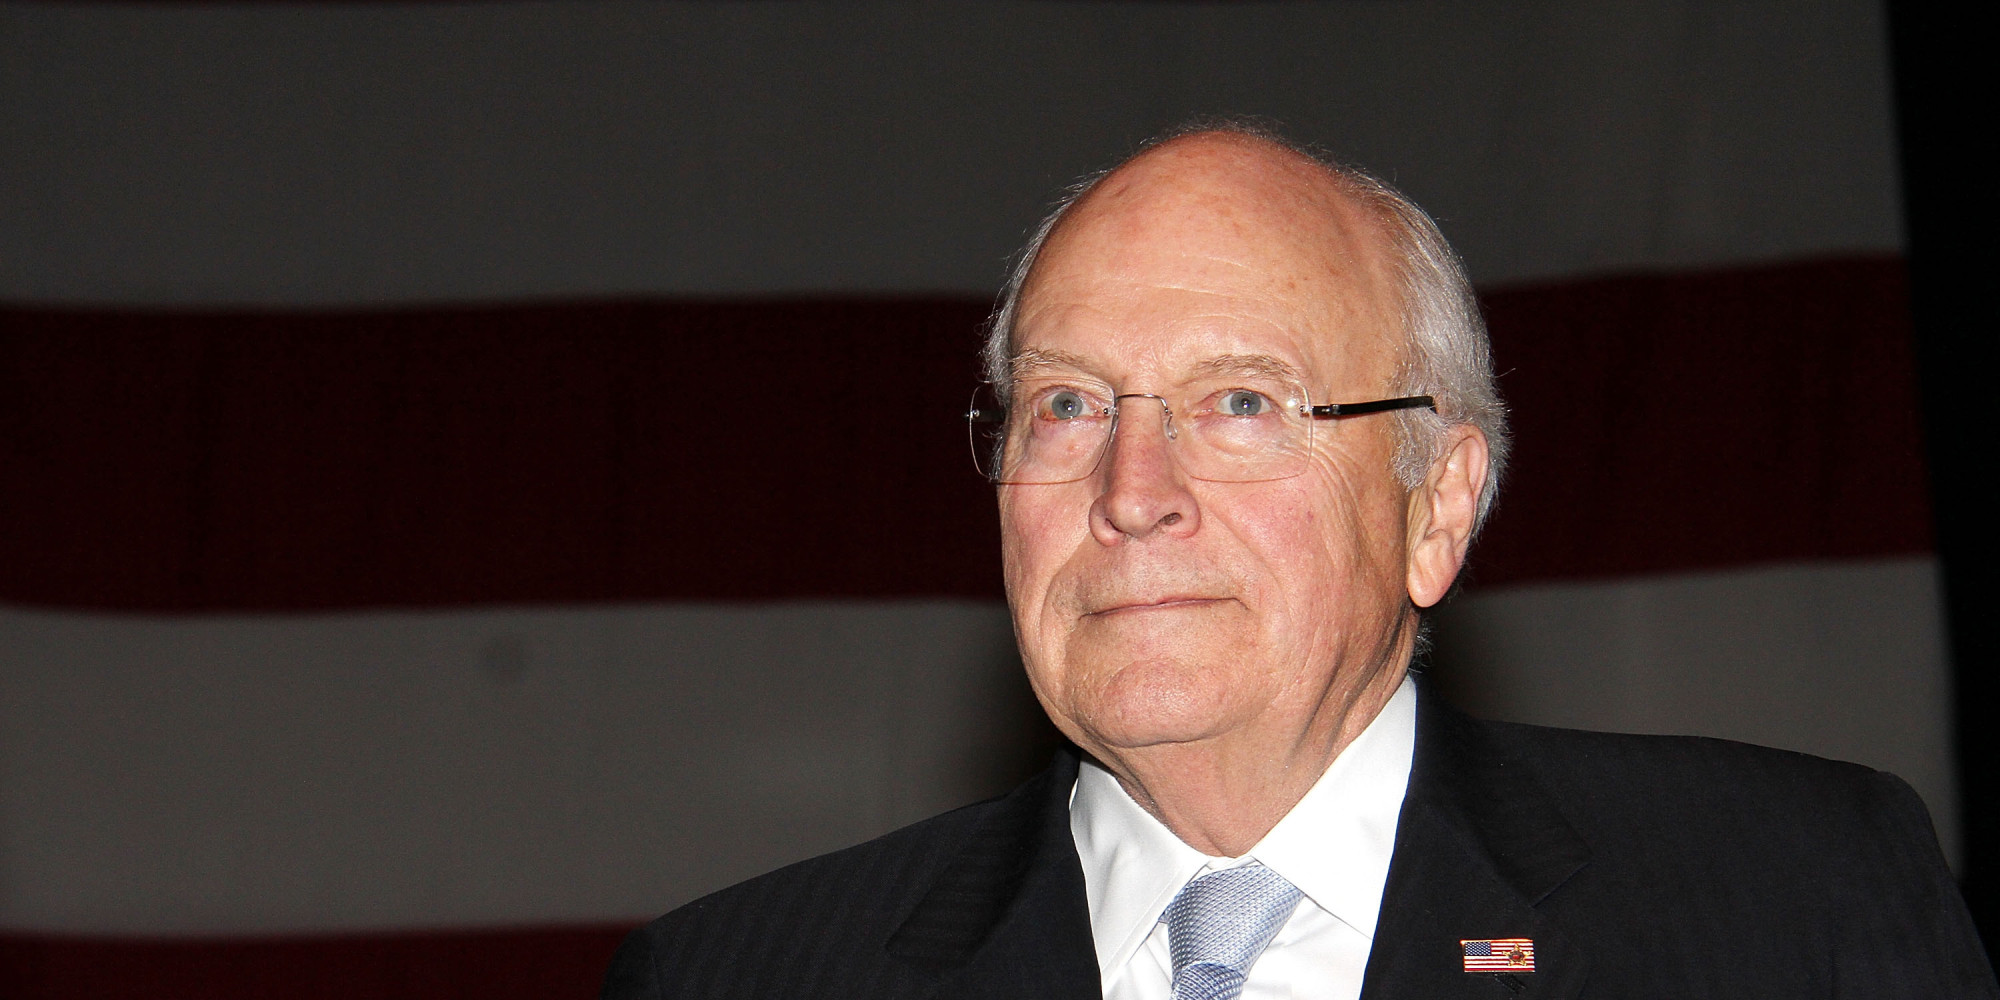 cheney face Dick s